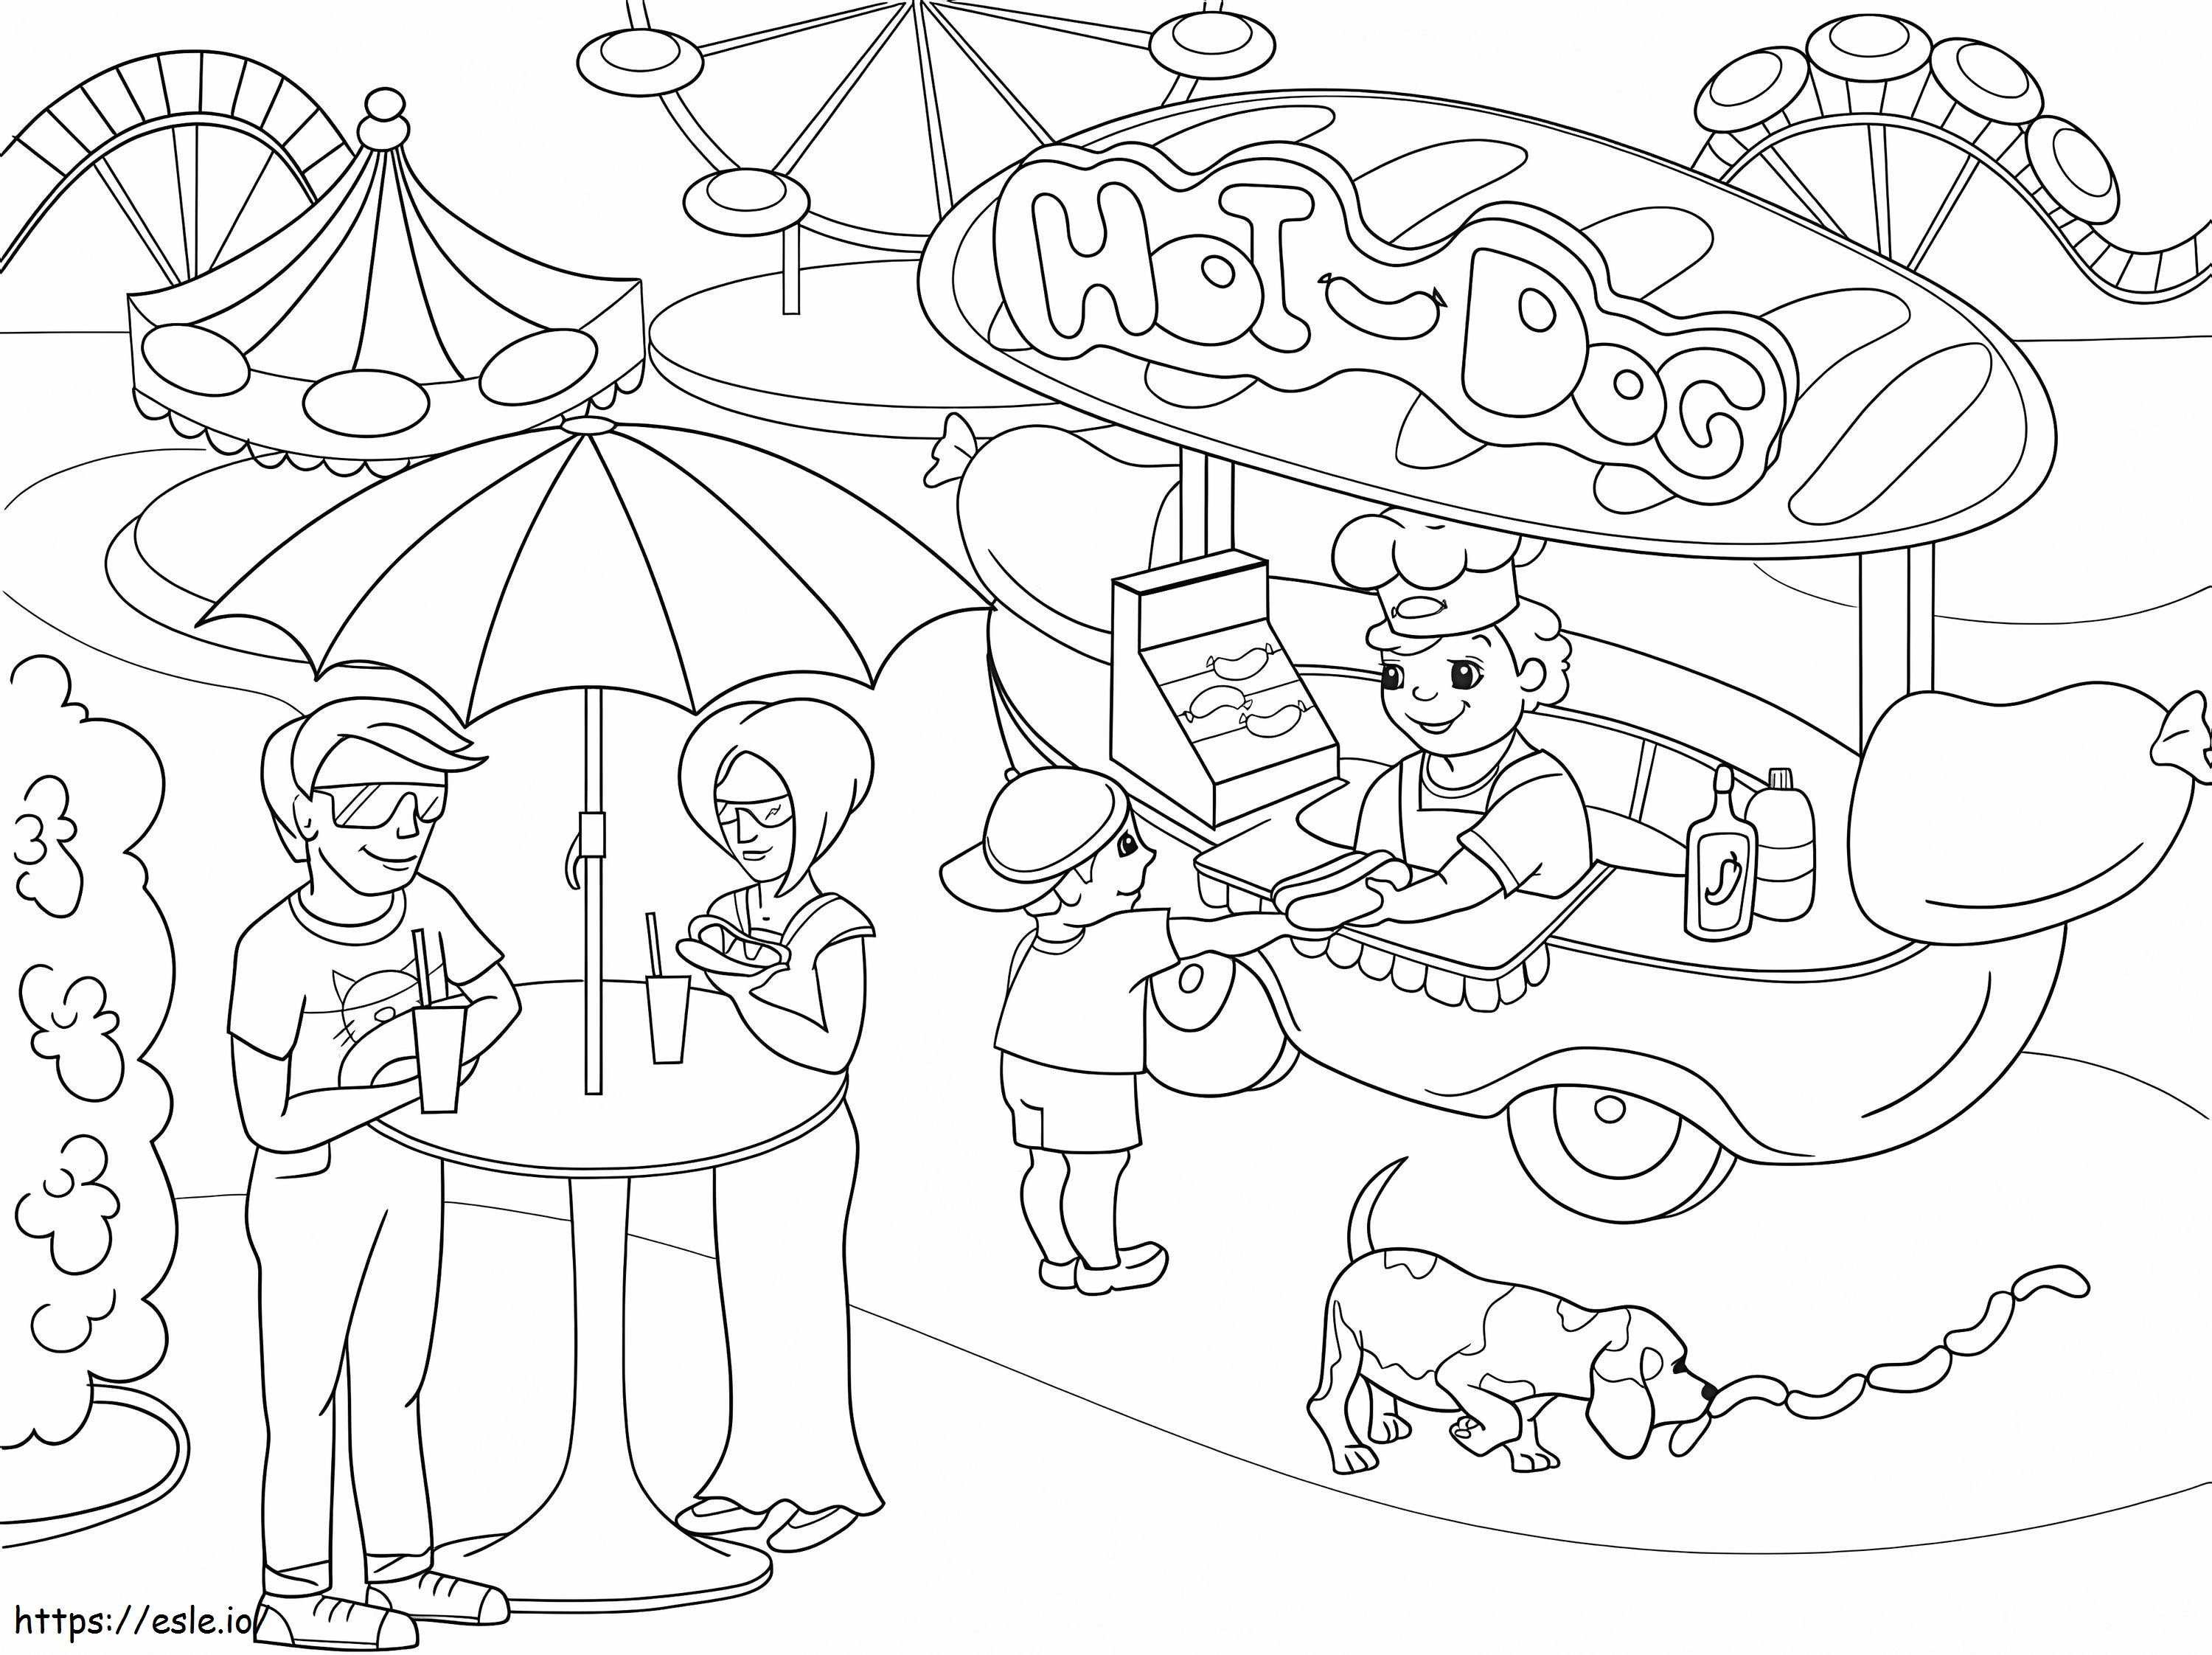 Printable Park coloring page